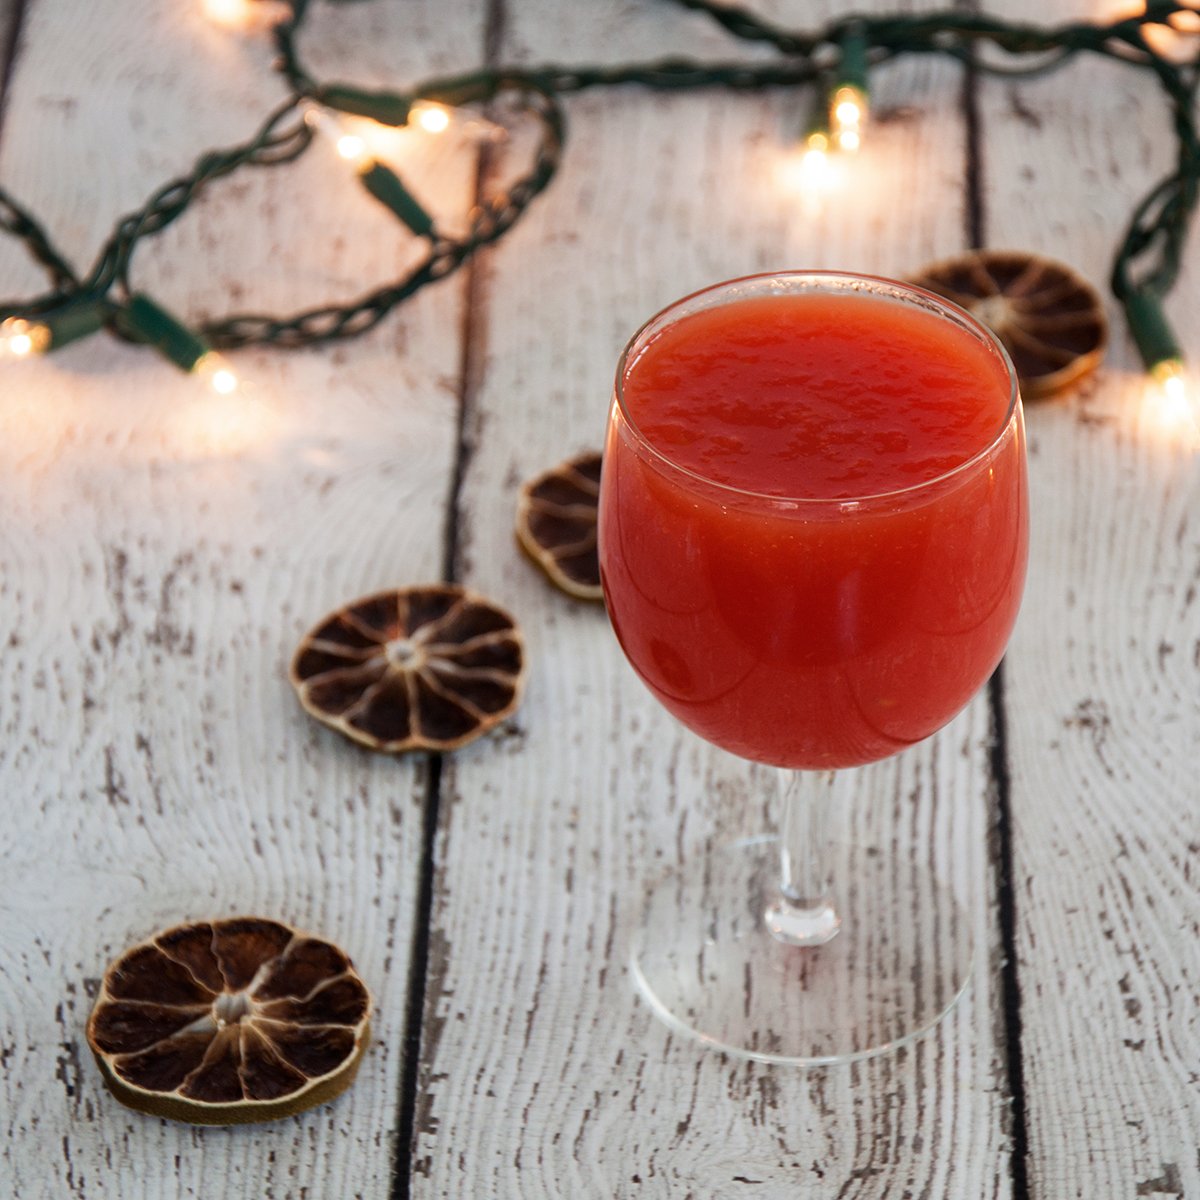 A glass of tomato juice on a wood table with dried limes and holiday lights in the background